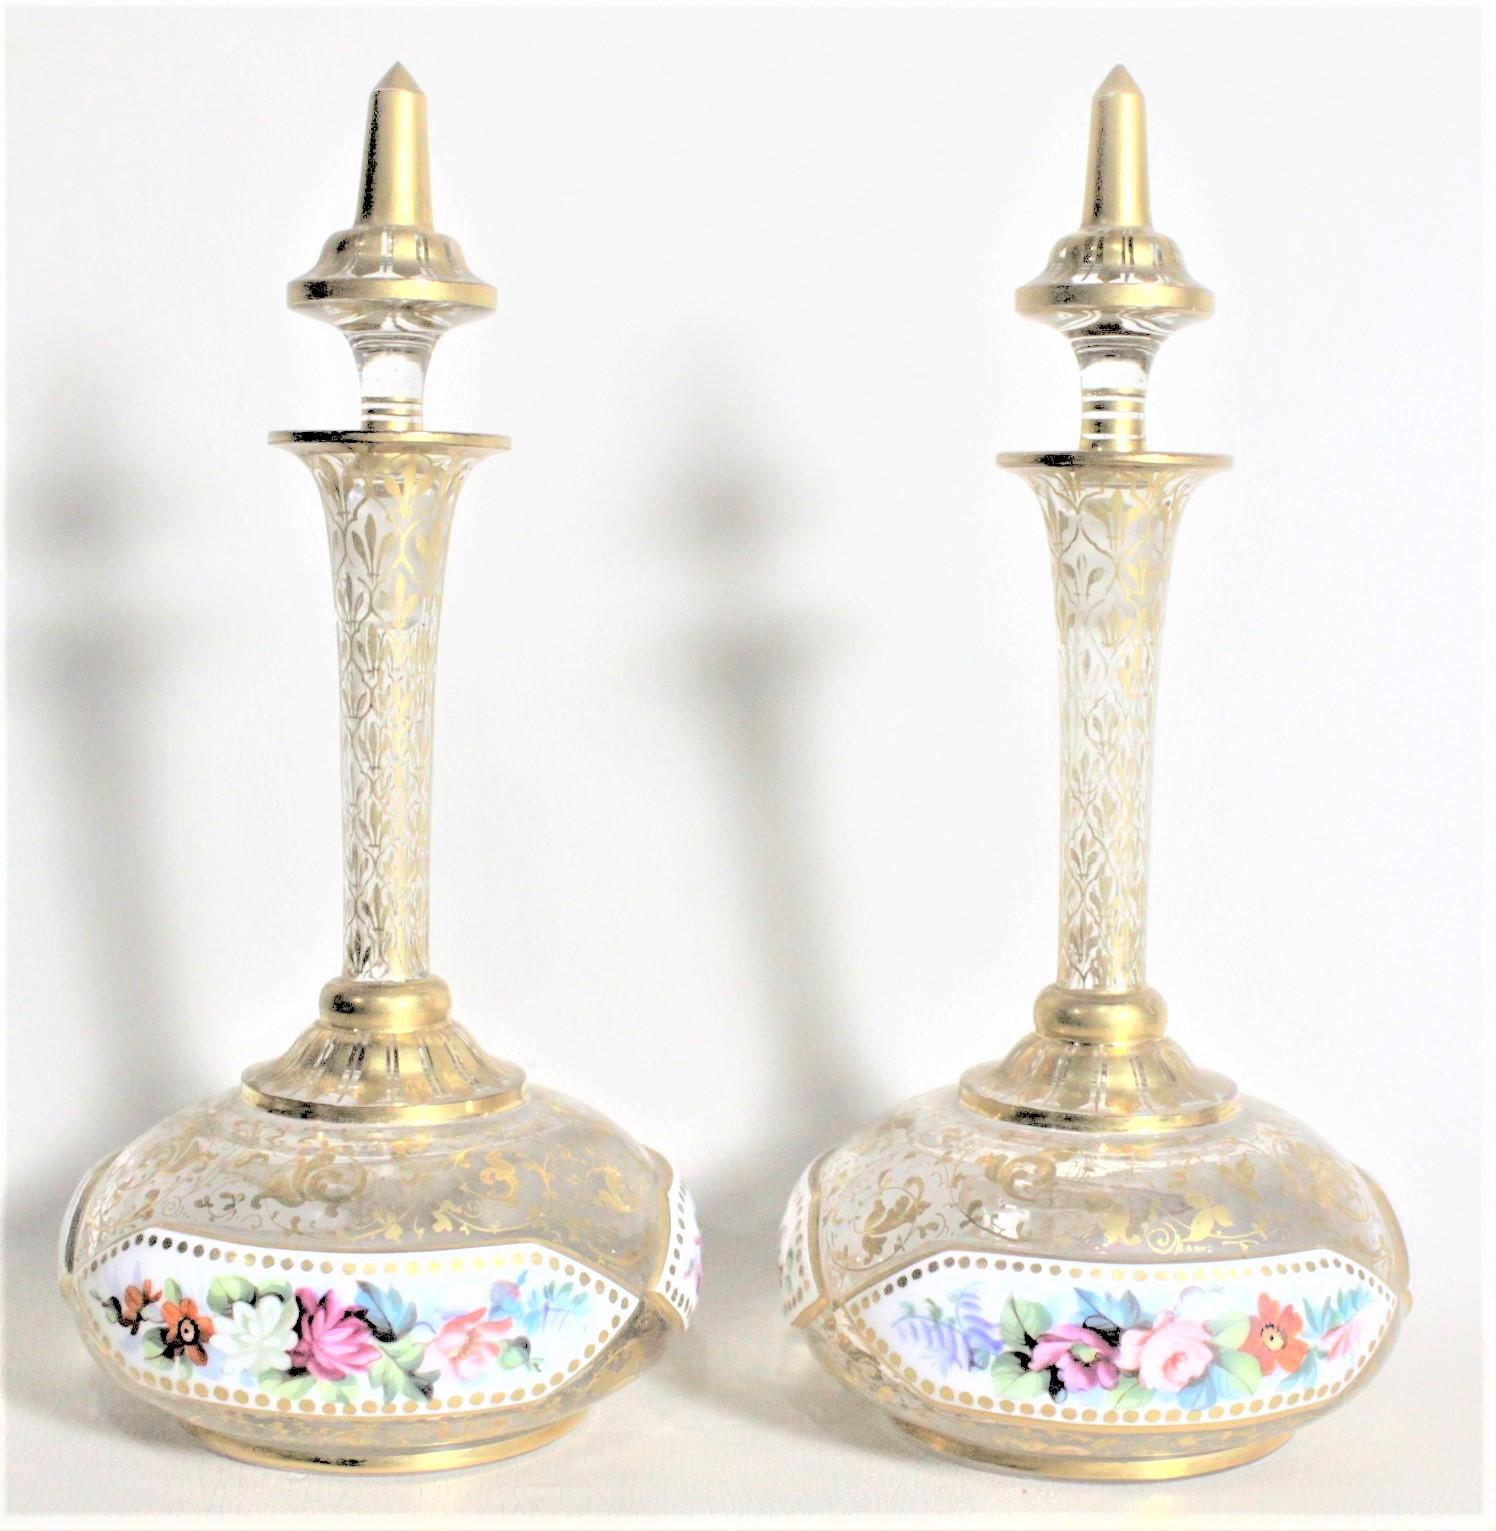 This pair of gilt and enameled glass perfume or scent bottles are unsigned, but presumed to have been made in Austria in circa 1925 in an Art Deco style. Each bottle from this matched set has three elongated enamel panels around the outside of their